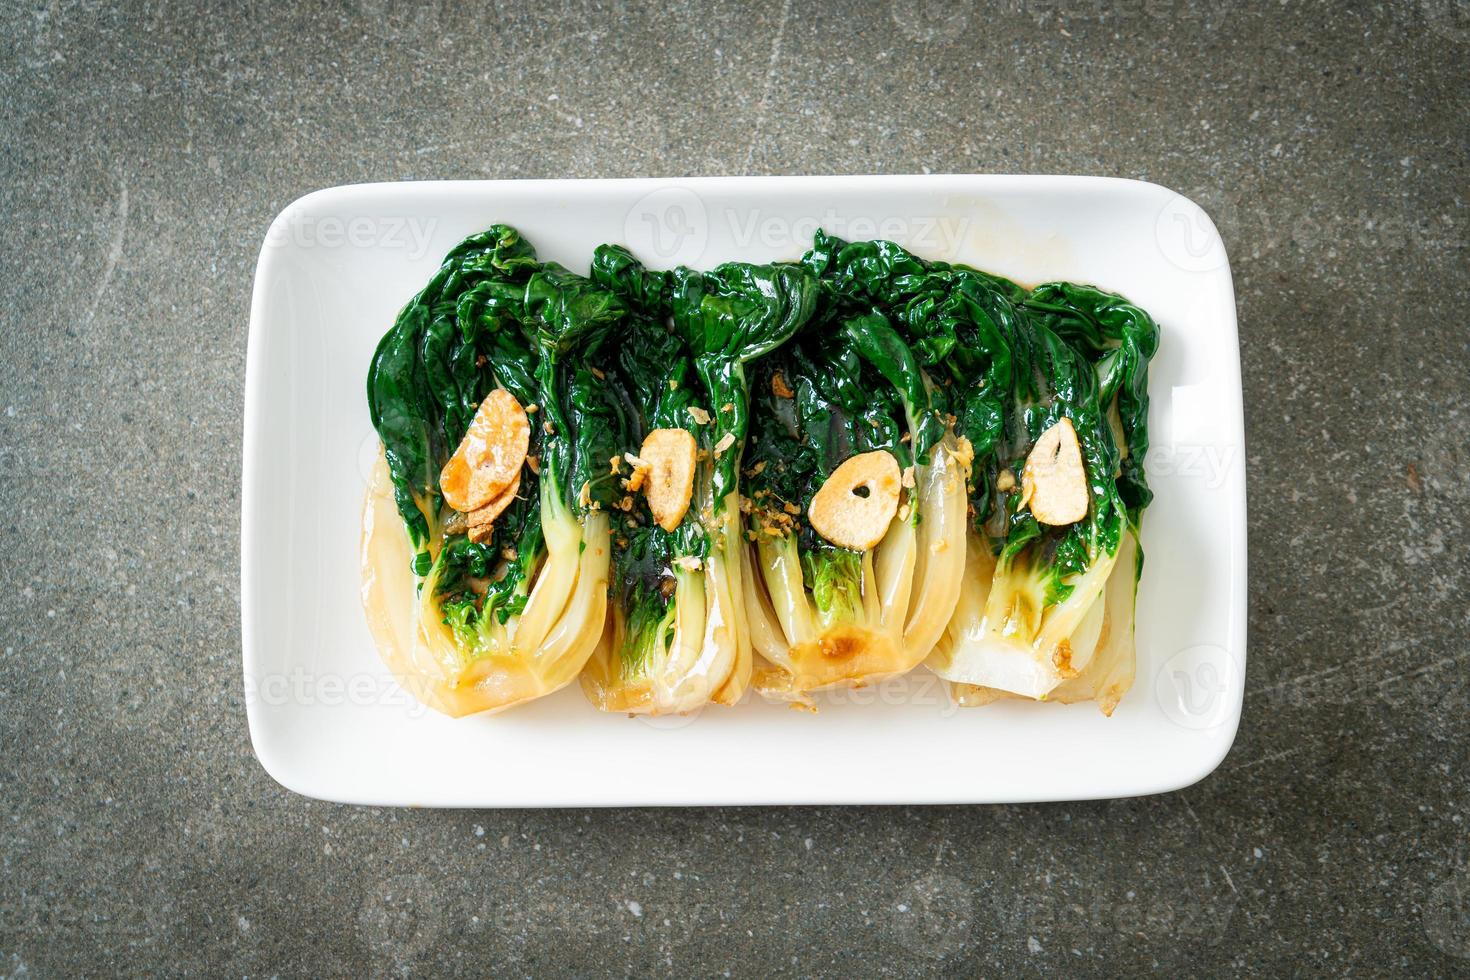 Baby Chinese cabbage with oyster sauce and garlic - Asian food style photo